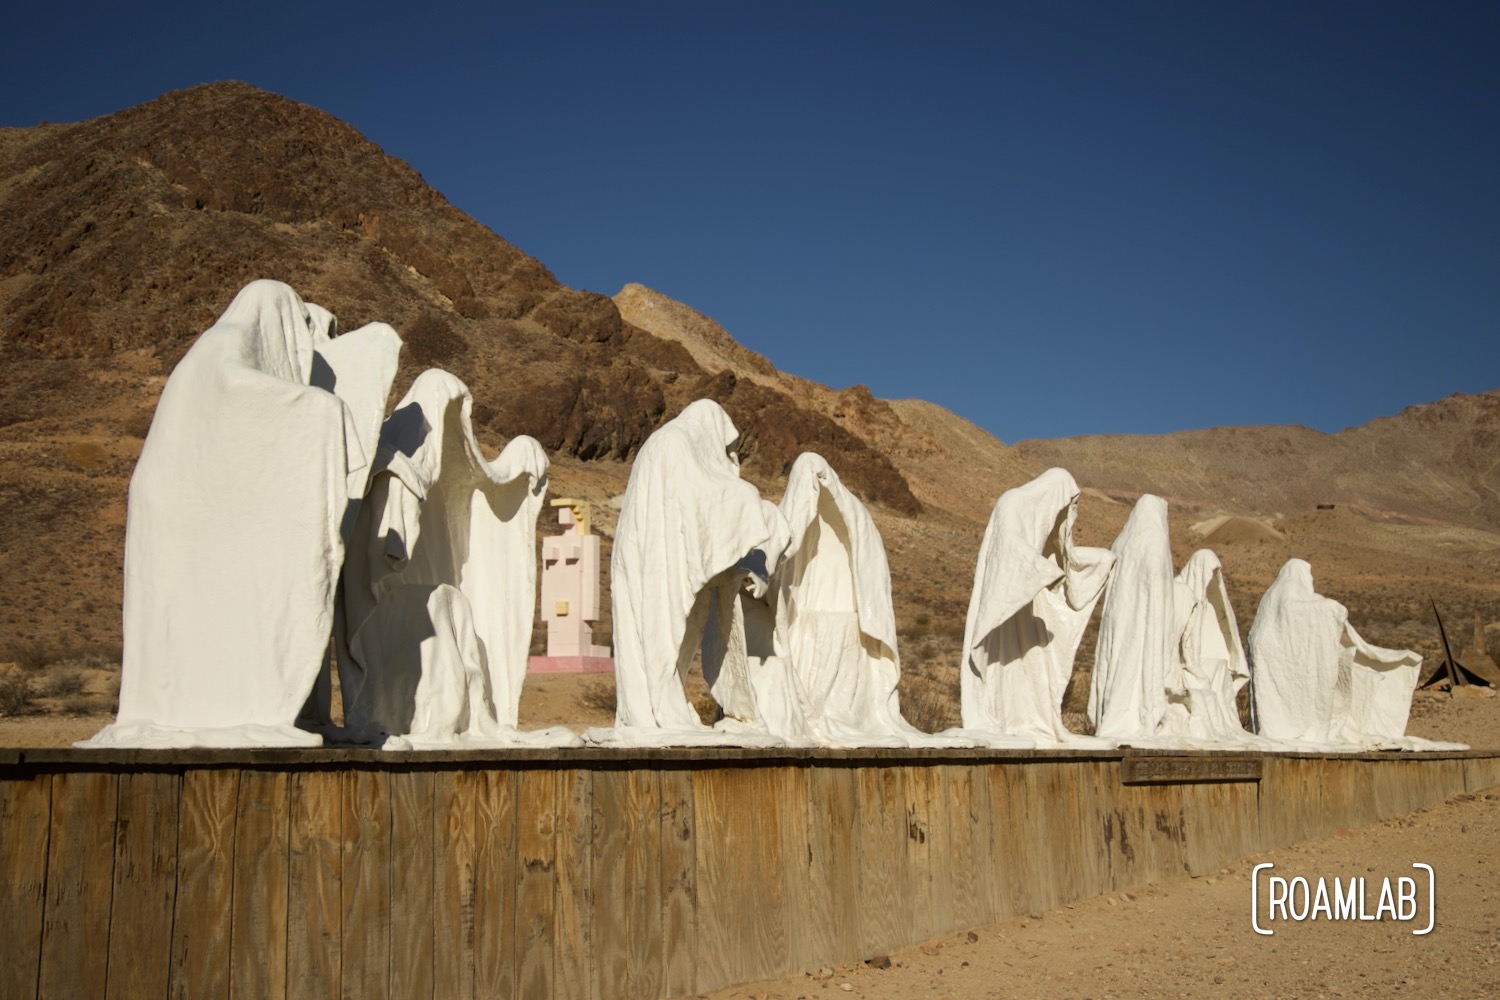 Plaster ghost sculptures in the form of the last supper on a wood platform.